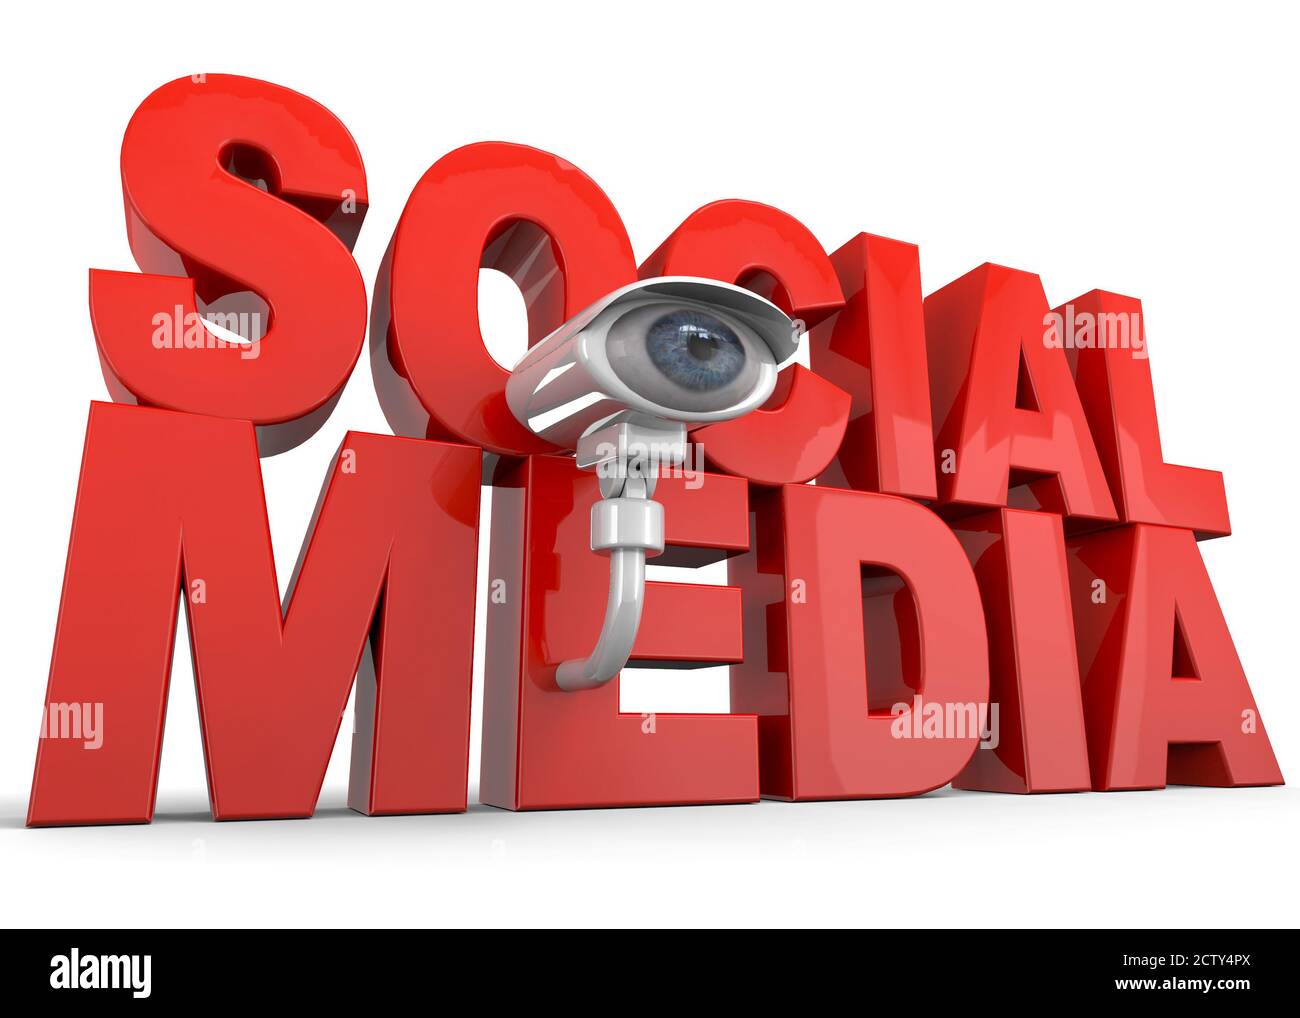 Social Media Are Spying You - 3D Concept Stock Photo